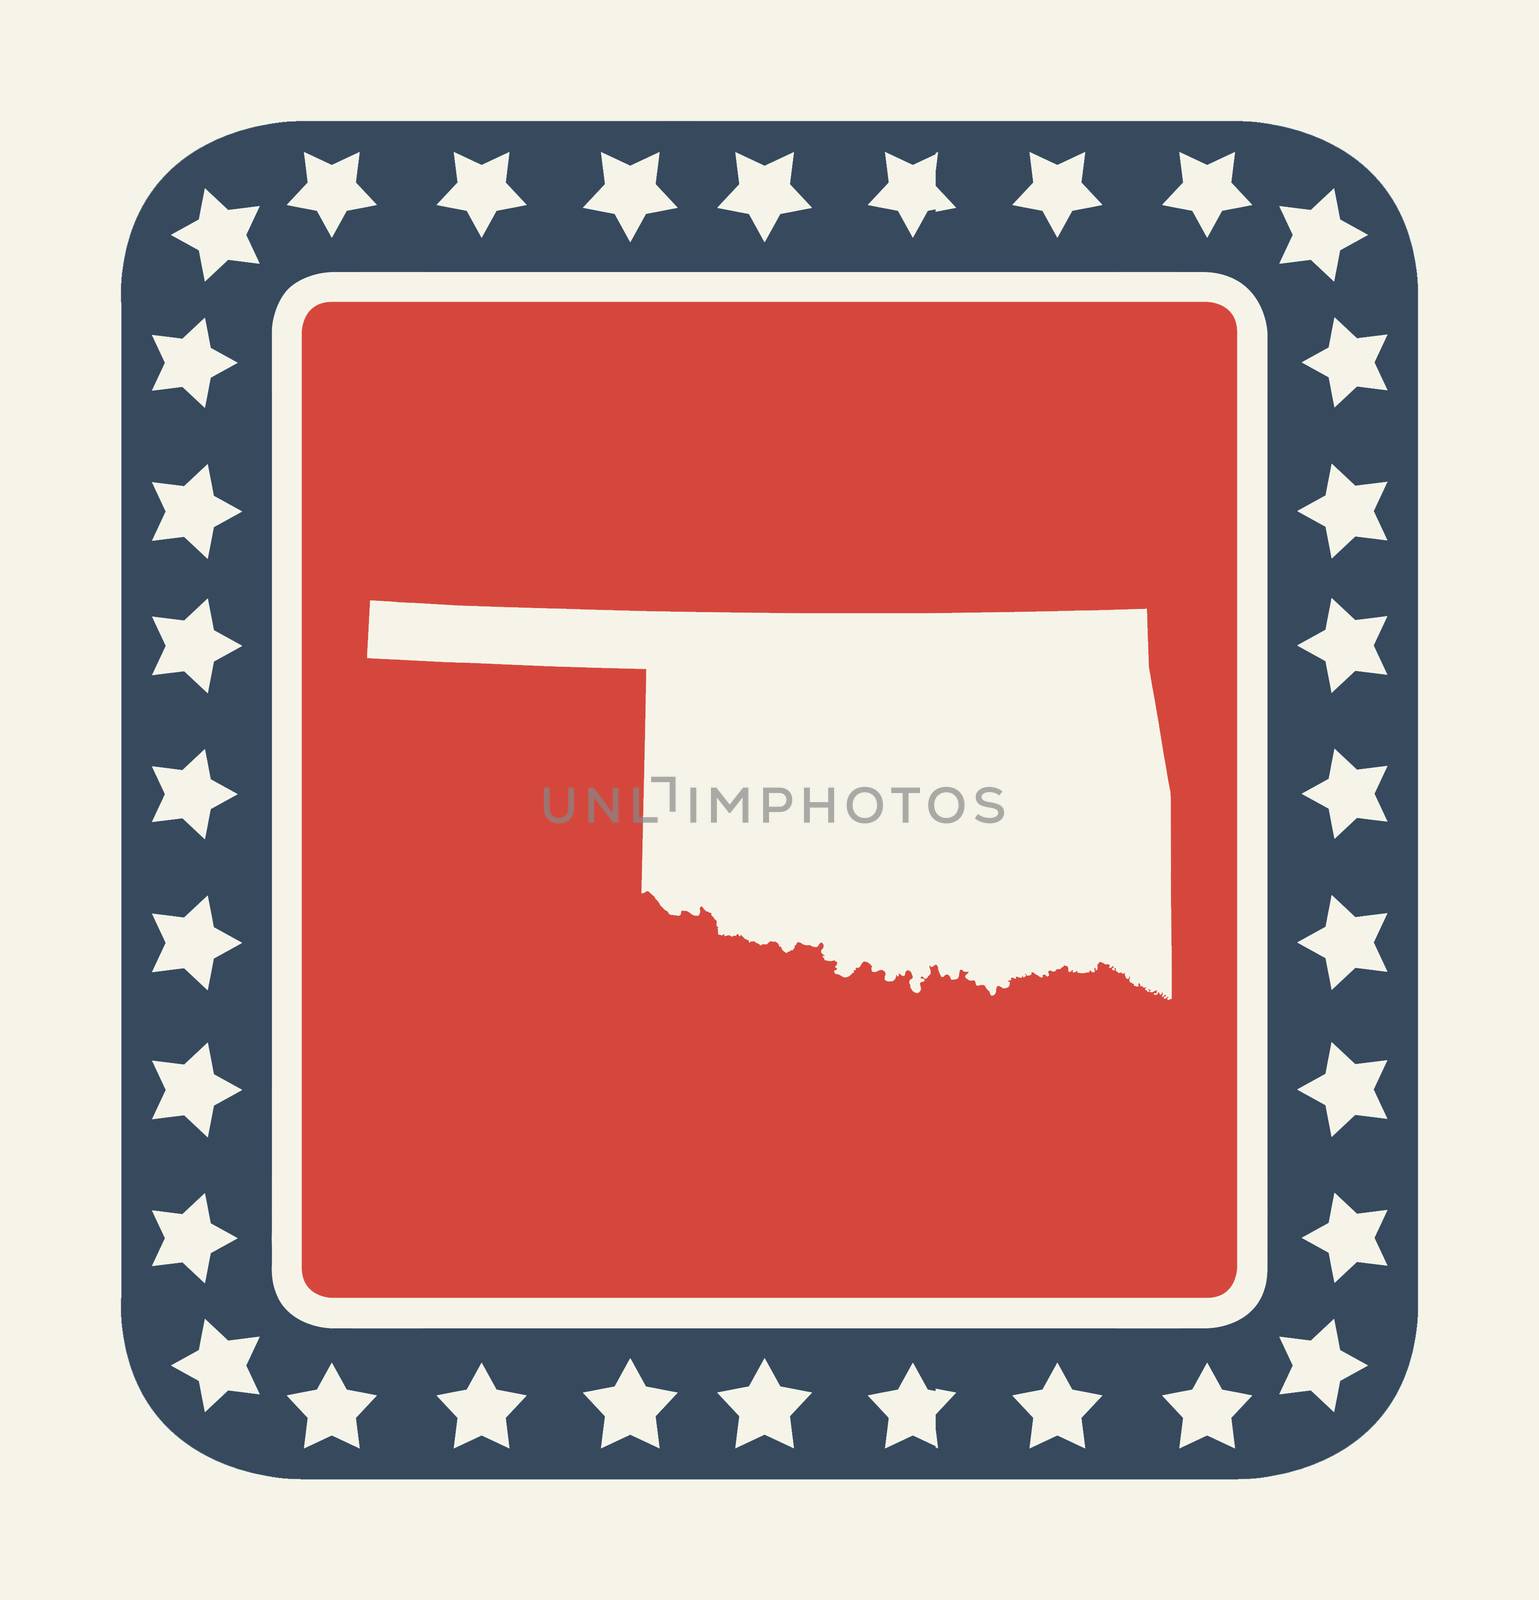 Oklahoma state button on American flag in flat web design style, isolated on white background.